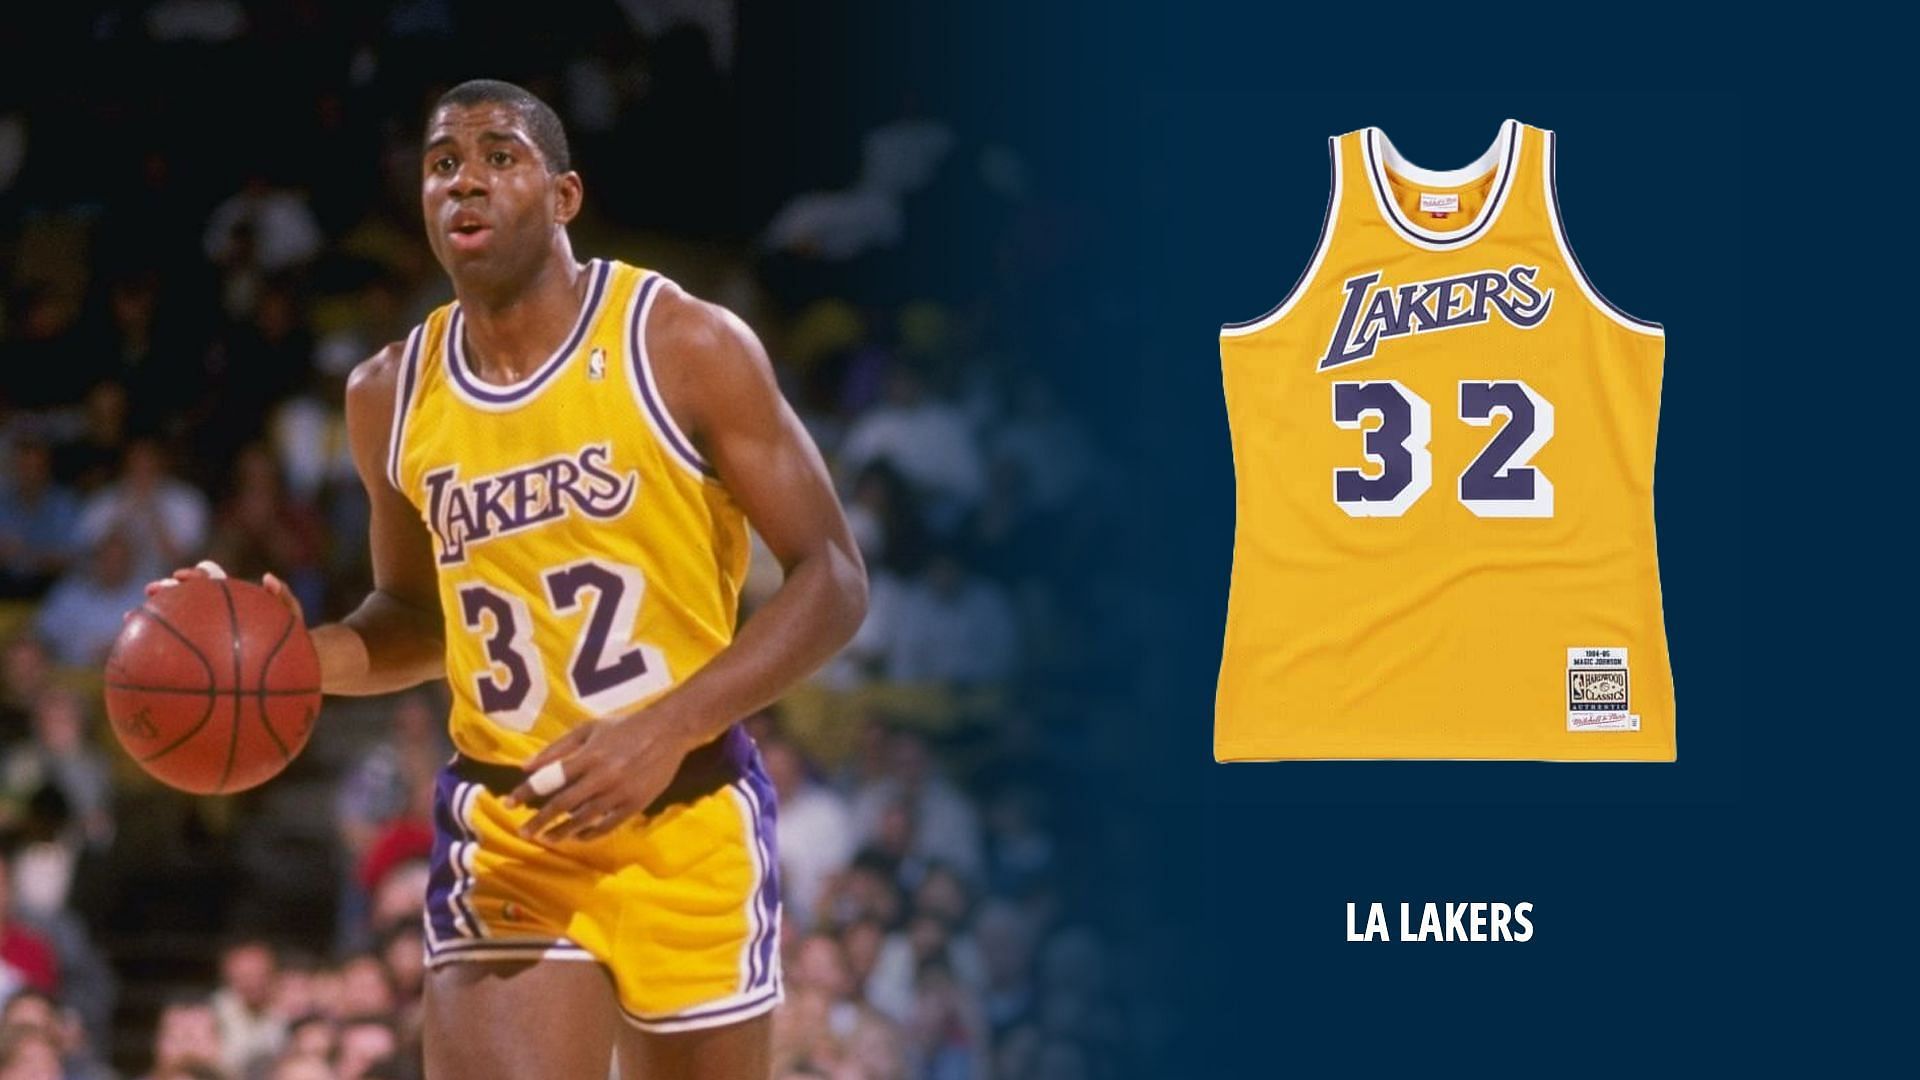 NBA jersey rankings: Lakers reign among league's best looks